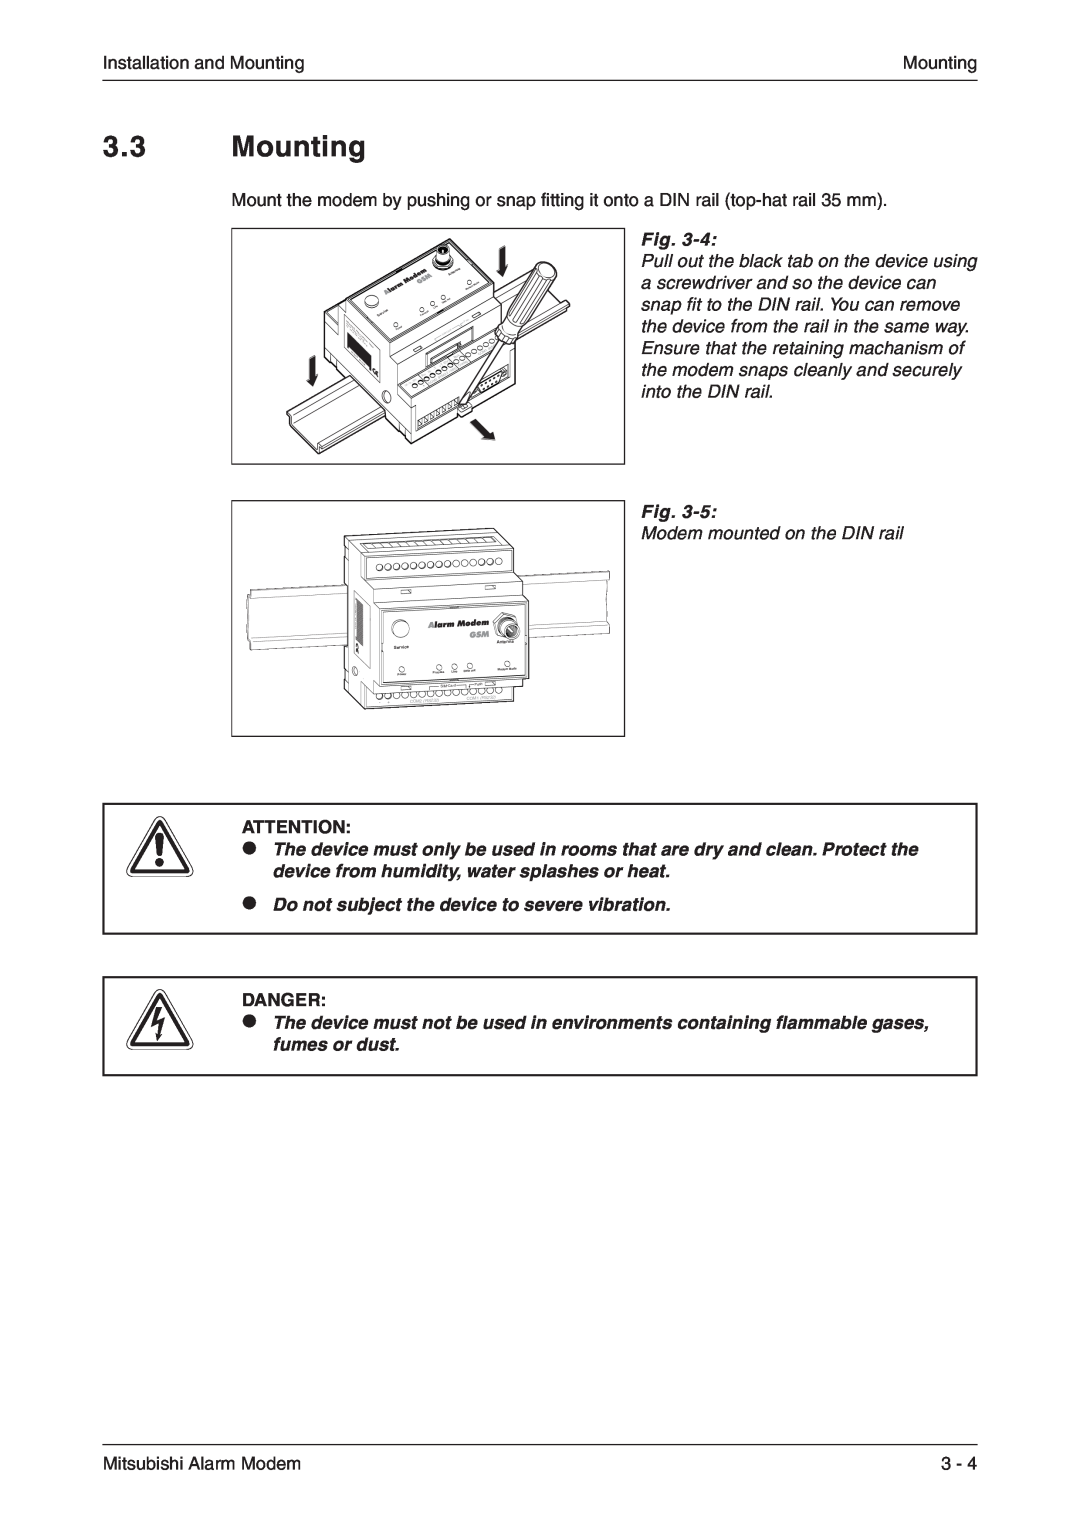 Mitsubishi Electronics MAM-AM24 Mounting, Modem mounted on the DIN rail, Do not subject the device to severe vibration 